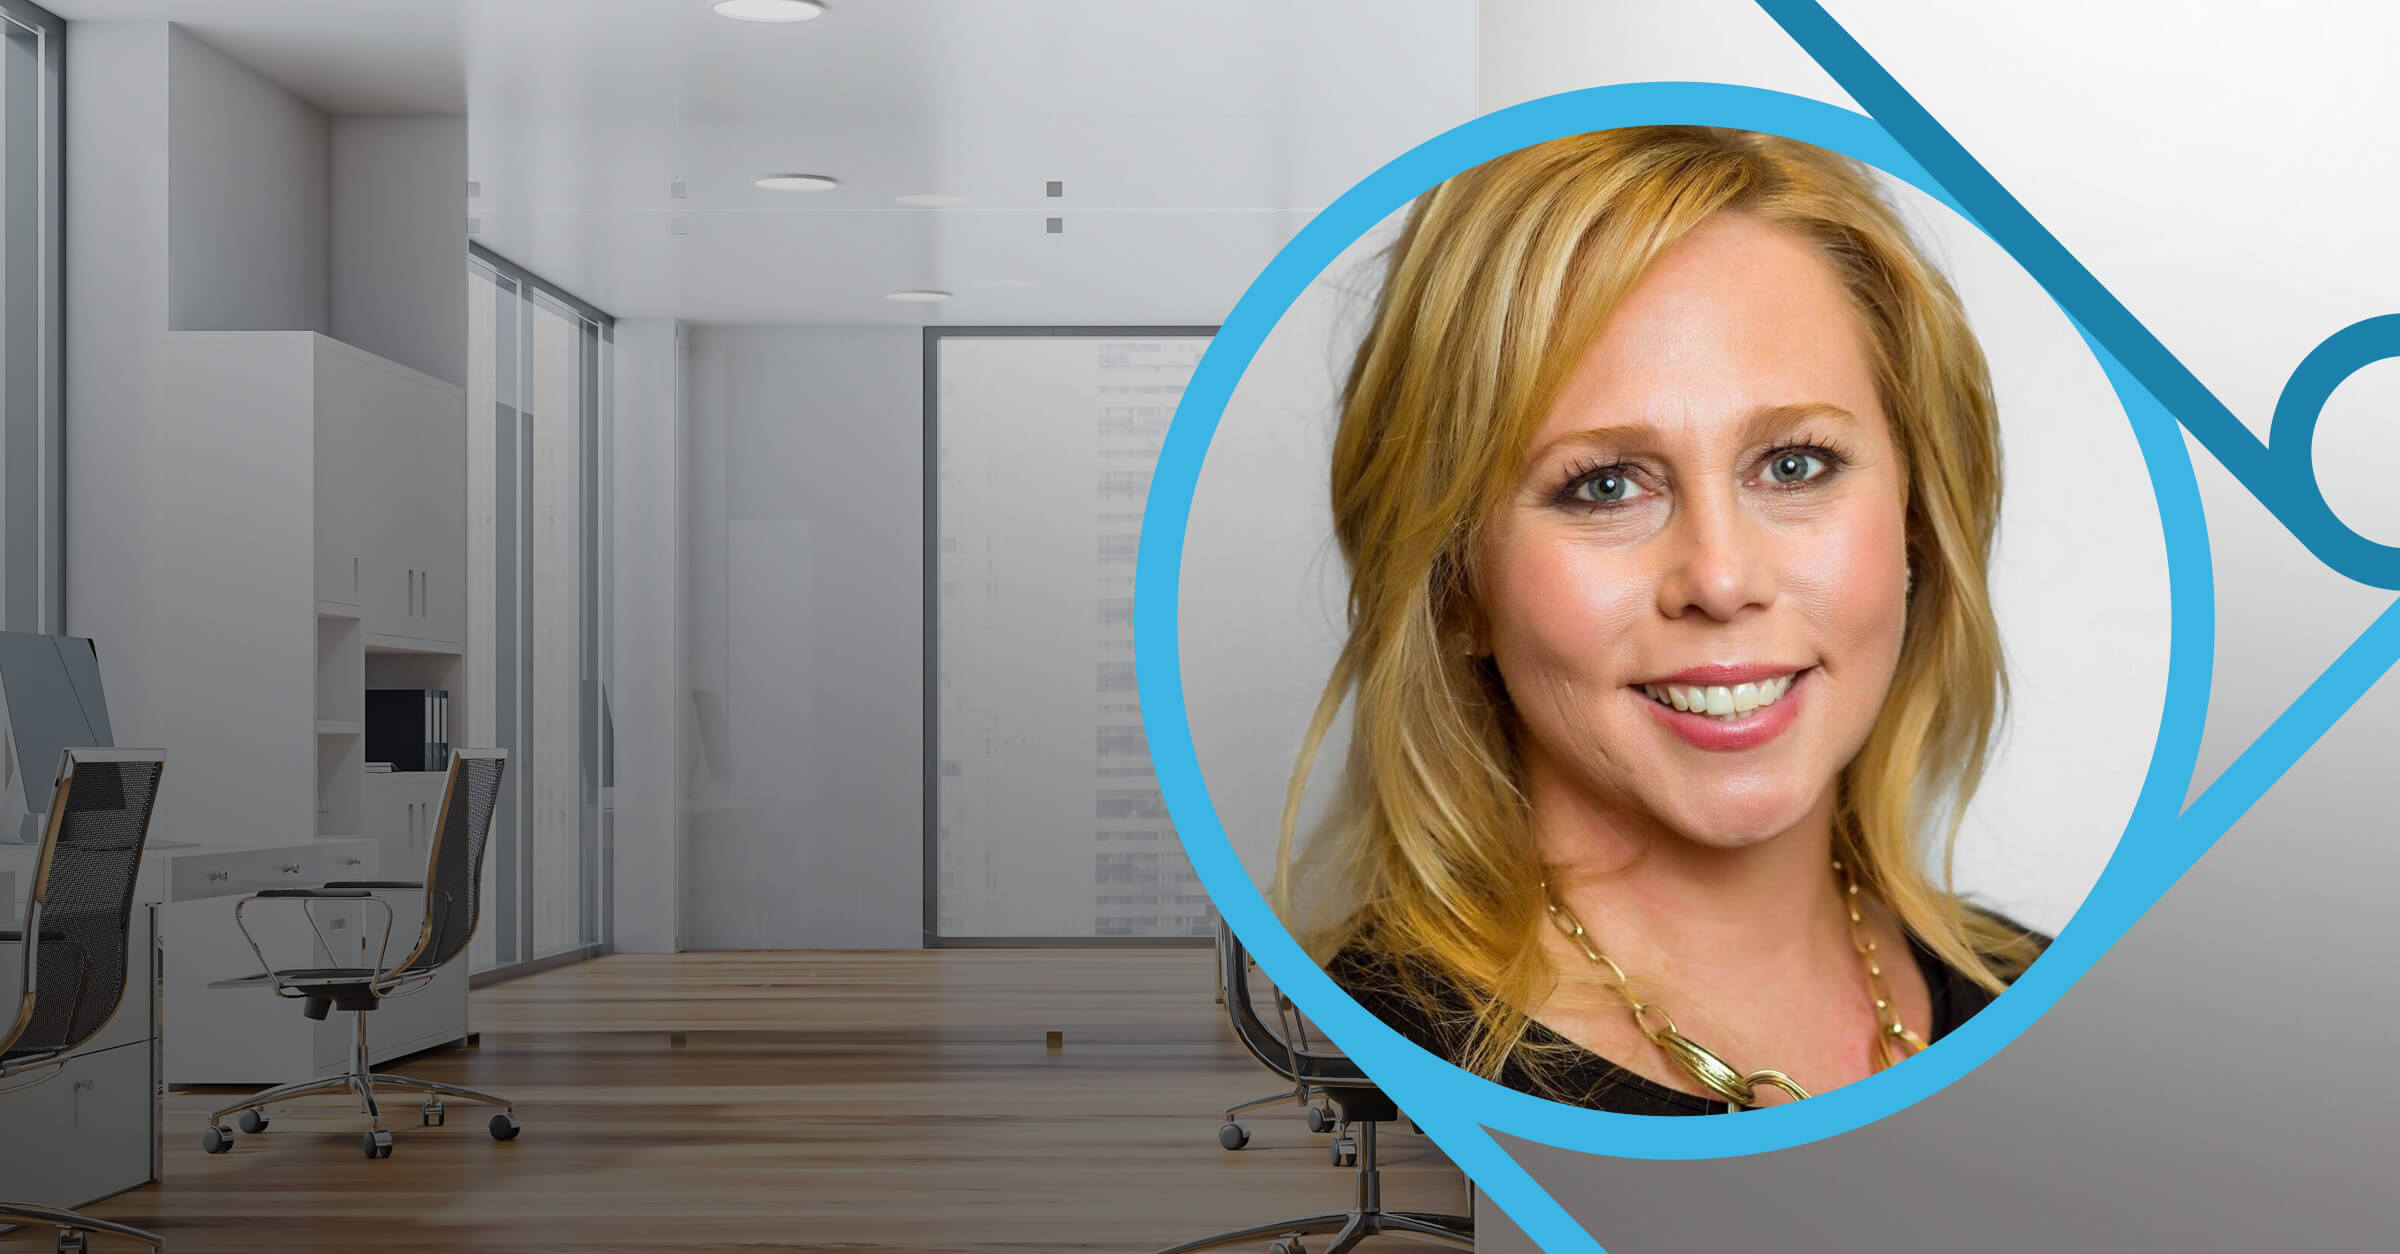 Amy Fenton joins the MarketCast leadership team as the Head of Ad Solutions